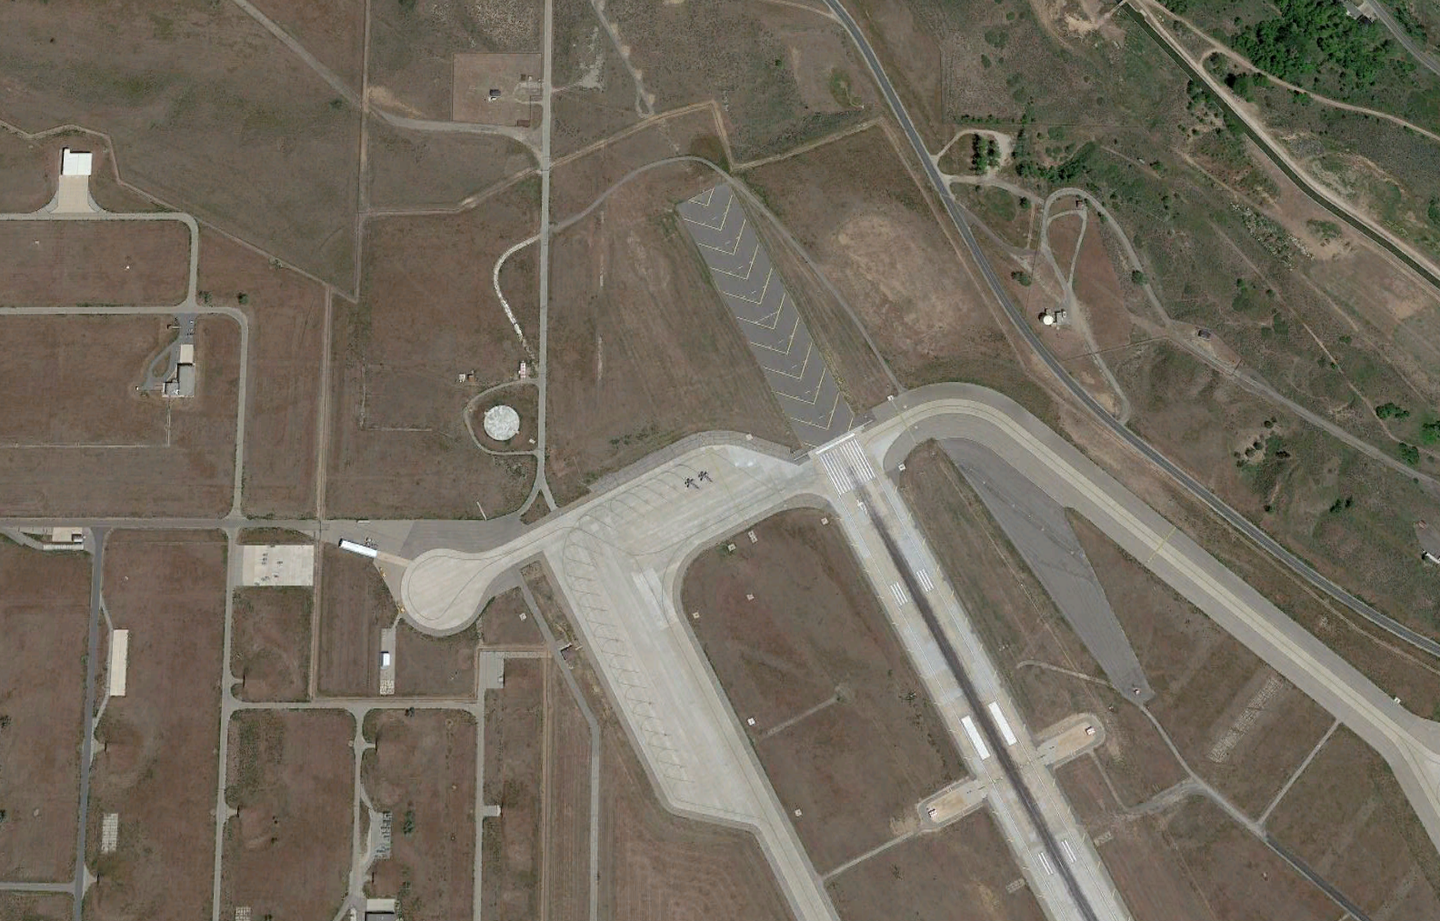 The northern end of Hill AFB's runway where the crash occurred. (Google Earth)